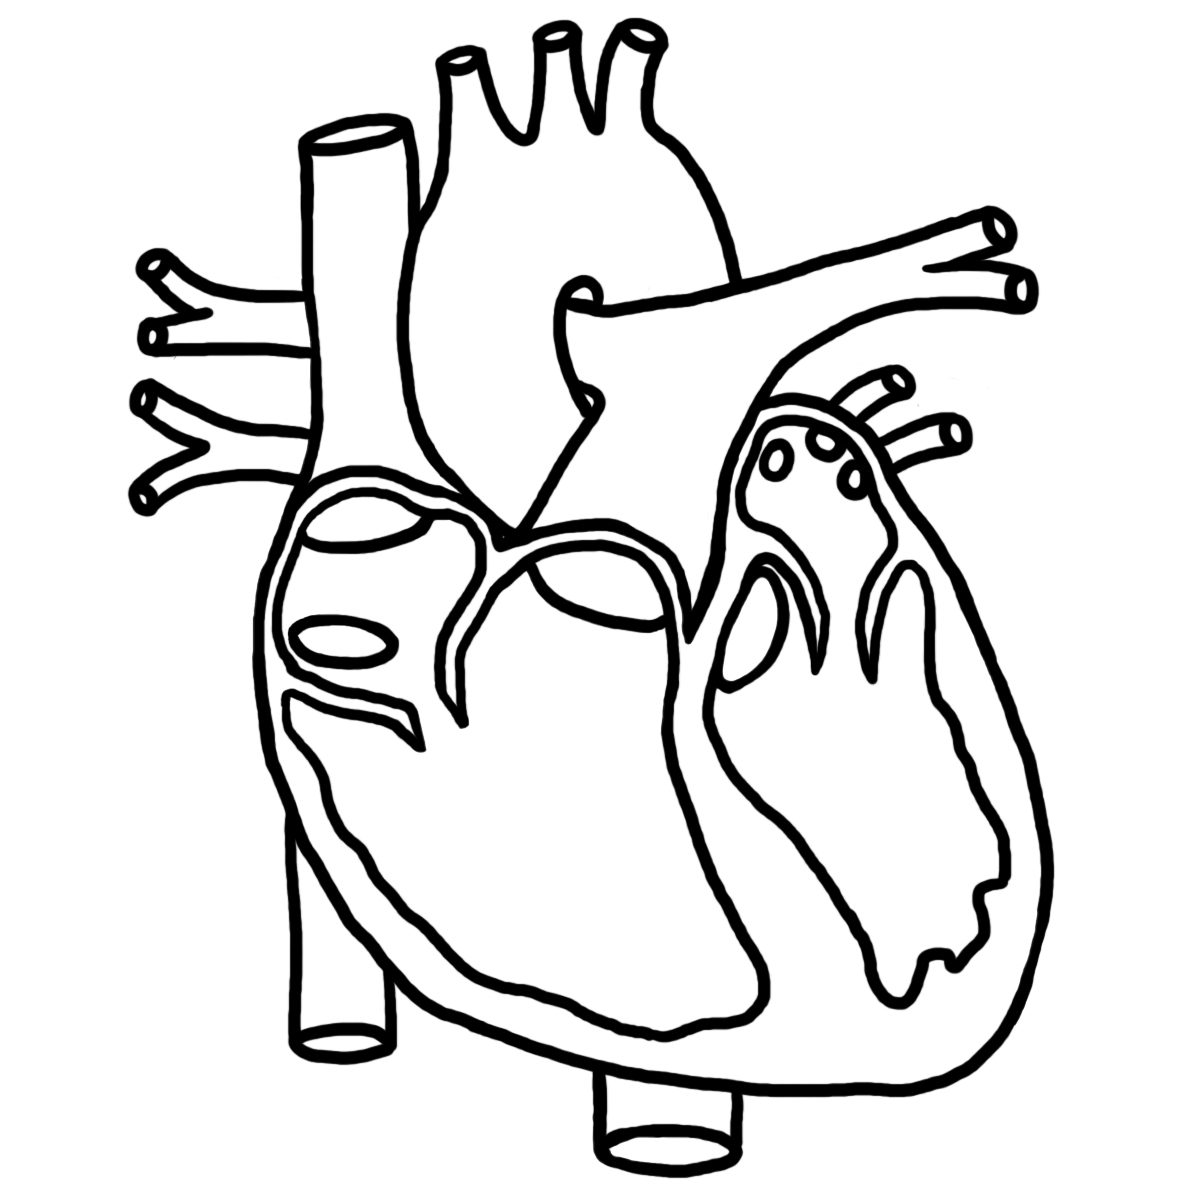 Coloring Page About The Heart